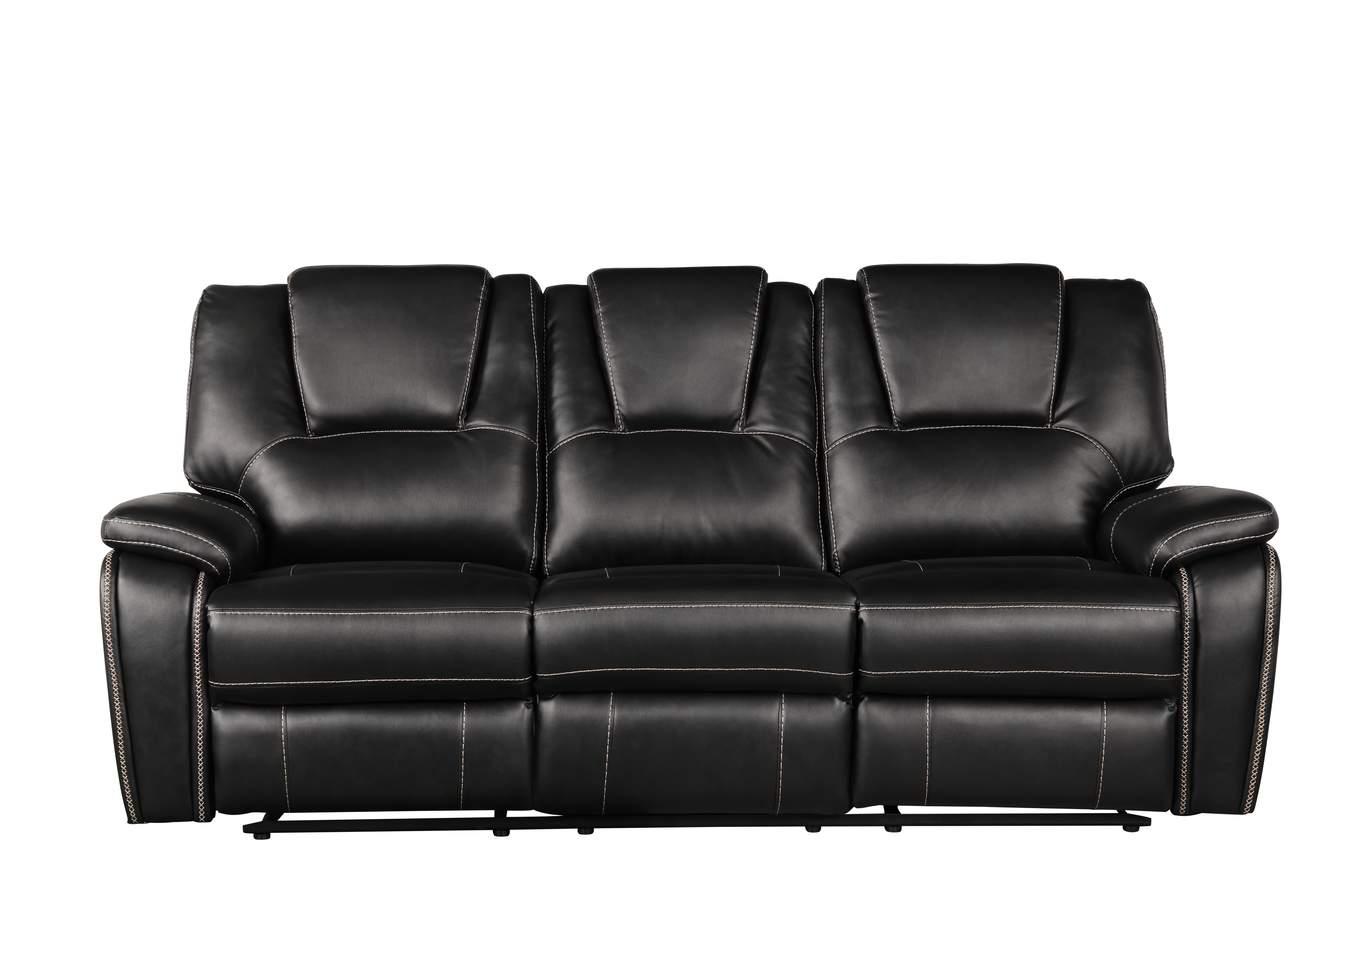 Contemporary, Modern Sofa recliner Hongkong GHF-733569371044 in Black Eco-Leather